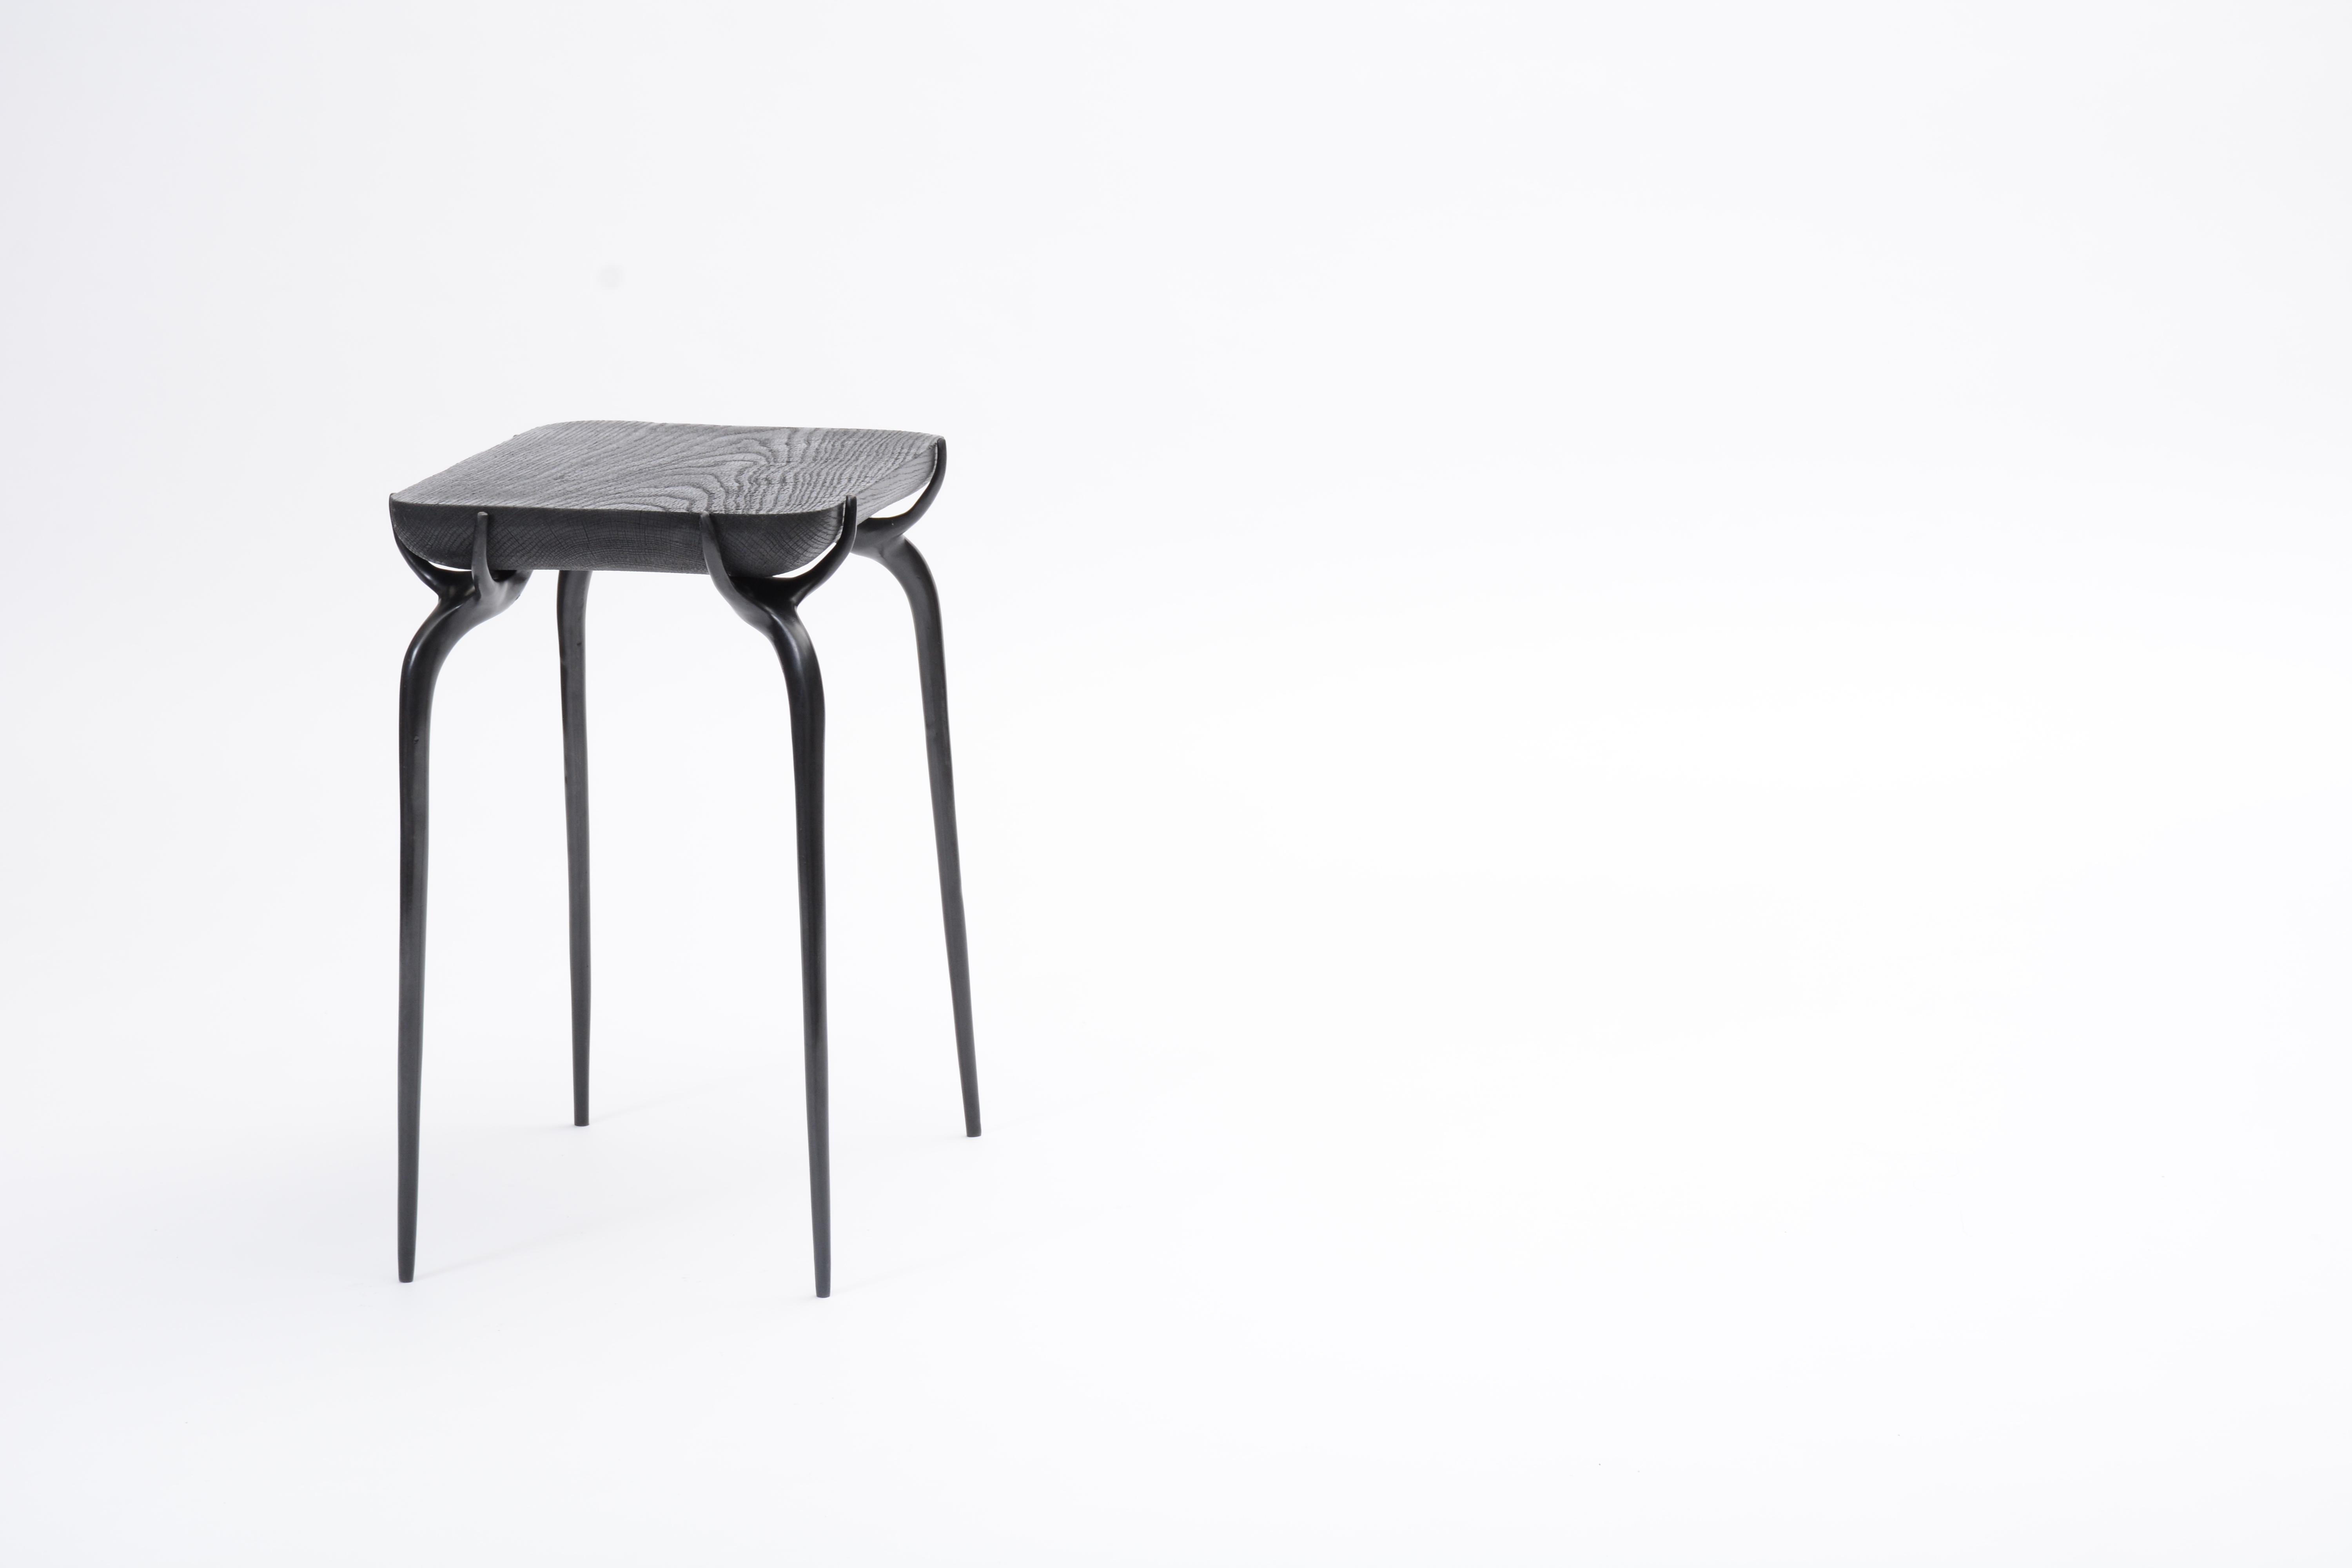 Dark Bronze Jewel Side Table with Burnt Black Oak Wooden Top by Elan Atelier

The jewel side table is inspired by a contemporary sculpture in mediums of wood, metal, and stone. The base is in cast bronze using the lost wax method and the top is in